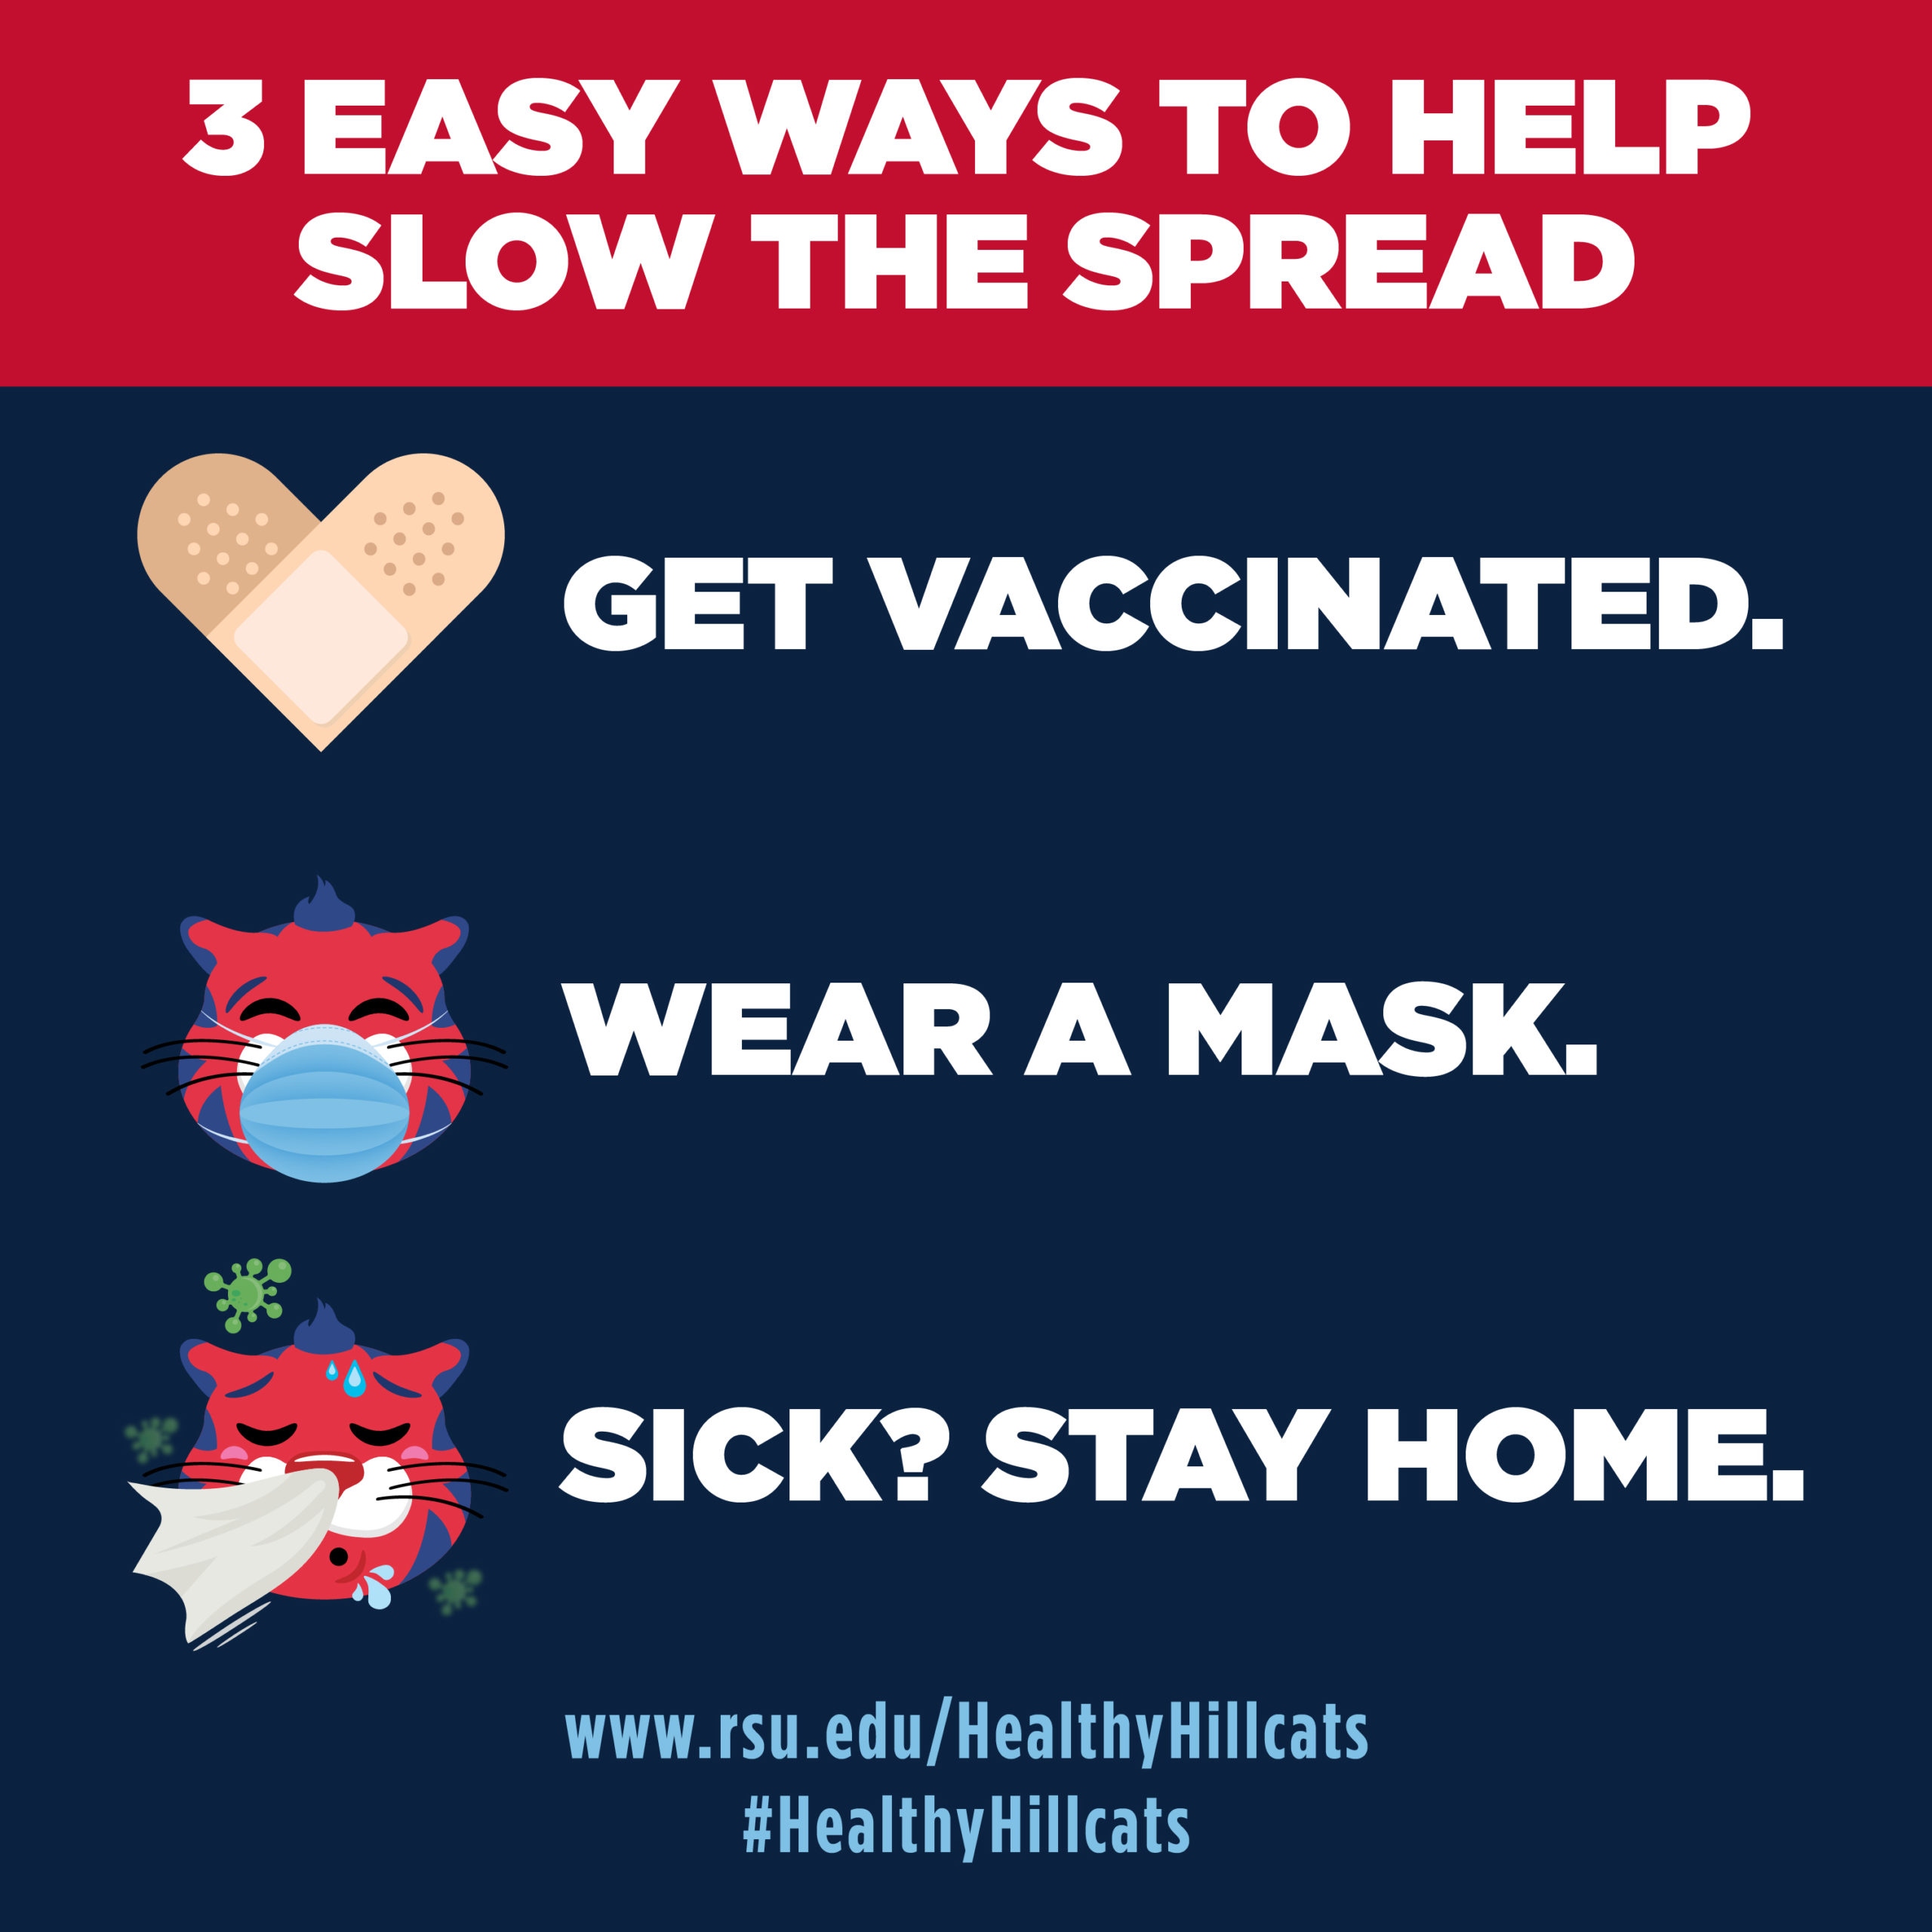 3 ways to slow the spread of covid-19. Get vaccinated. Wear a mask. Sick? Stay home.